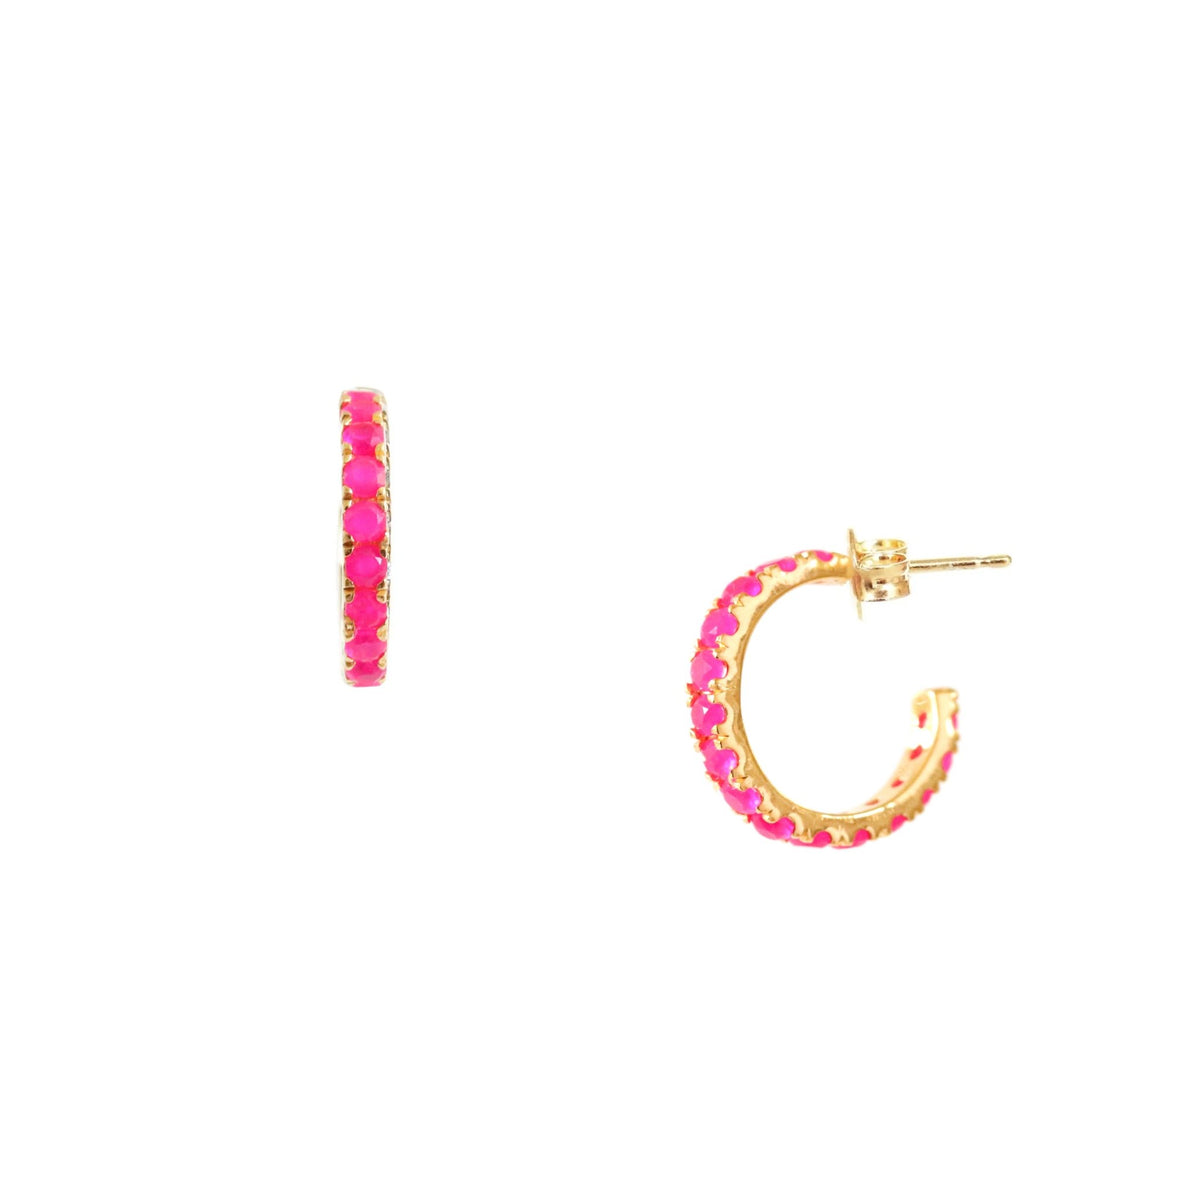 LOVE HUGGIE HOOPS - HOT PINK CHALCEDONY &amp; GOLD - SO PRETTY CARA COTTER